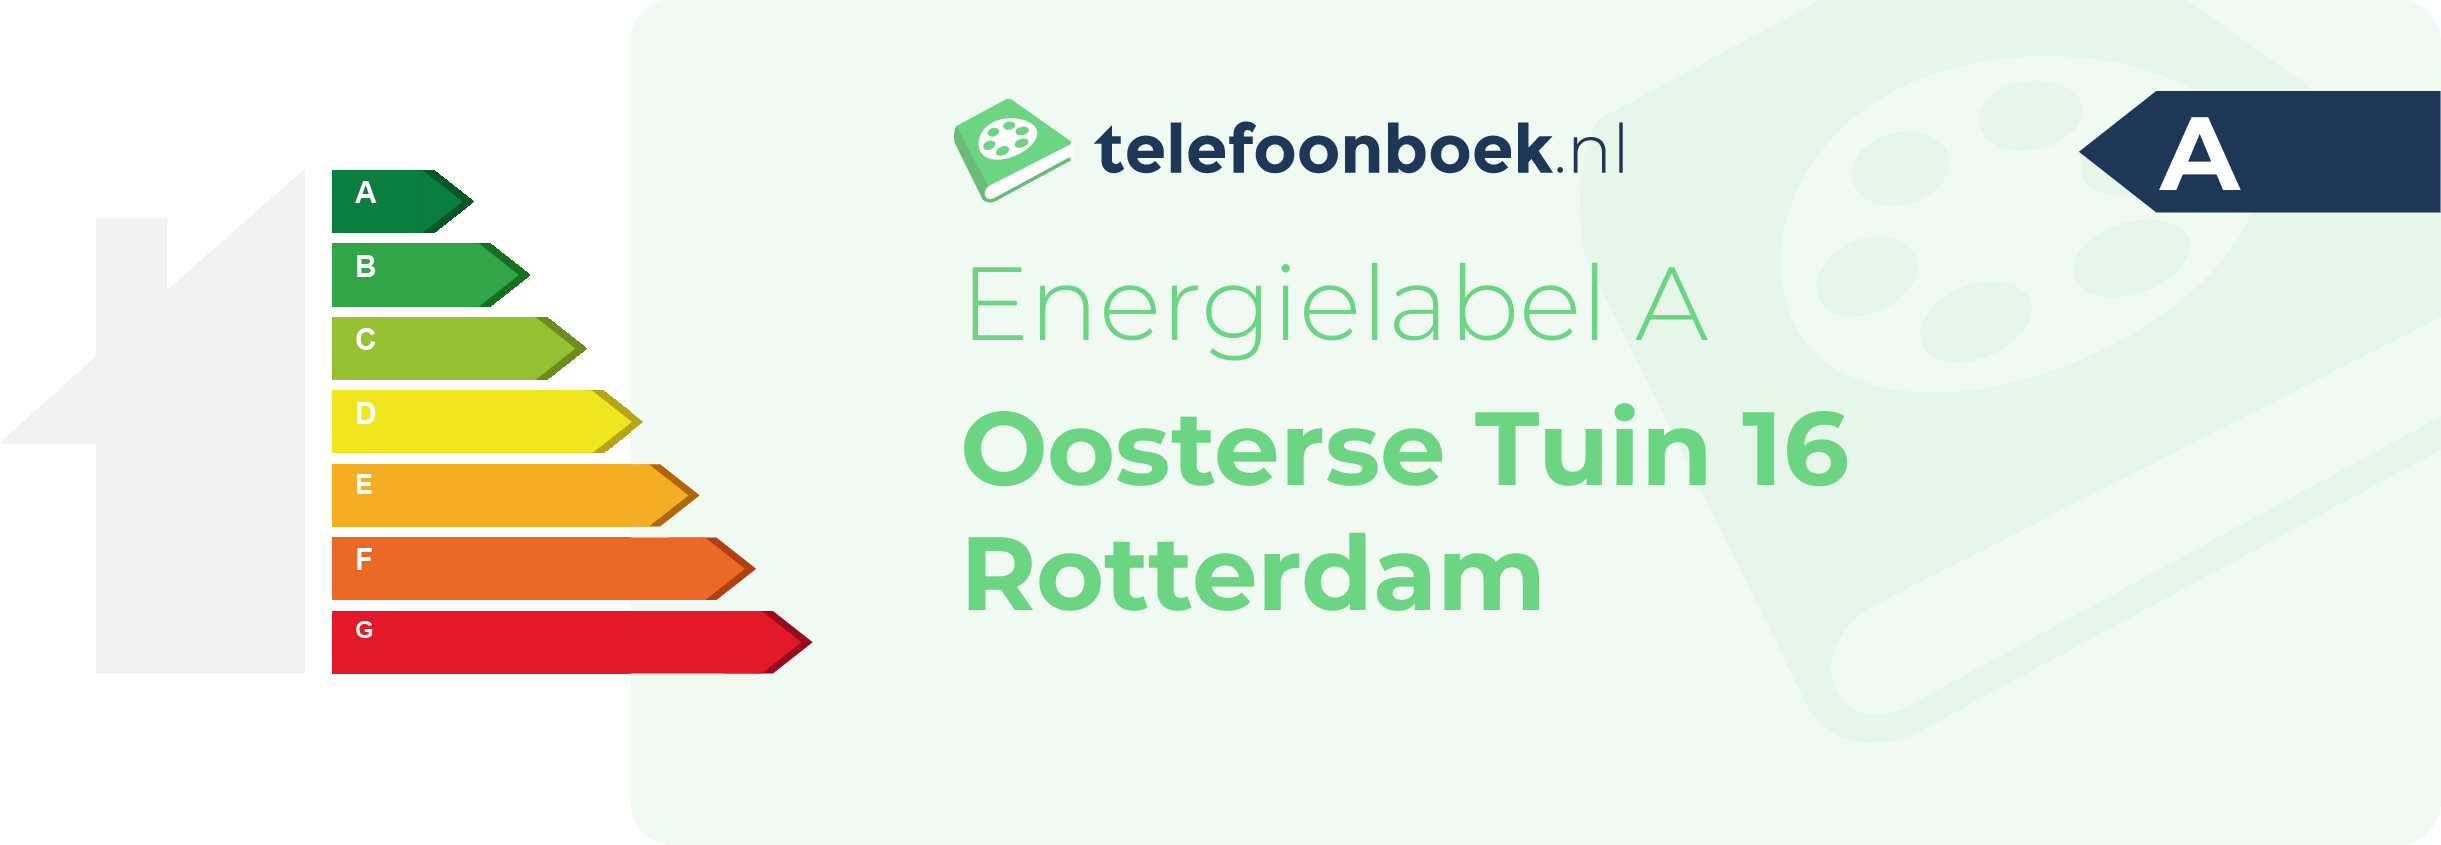 Energielabel Oosterse Tuin 16 Rotterdam